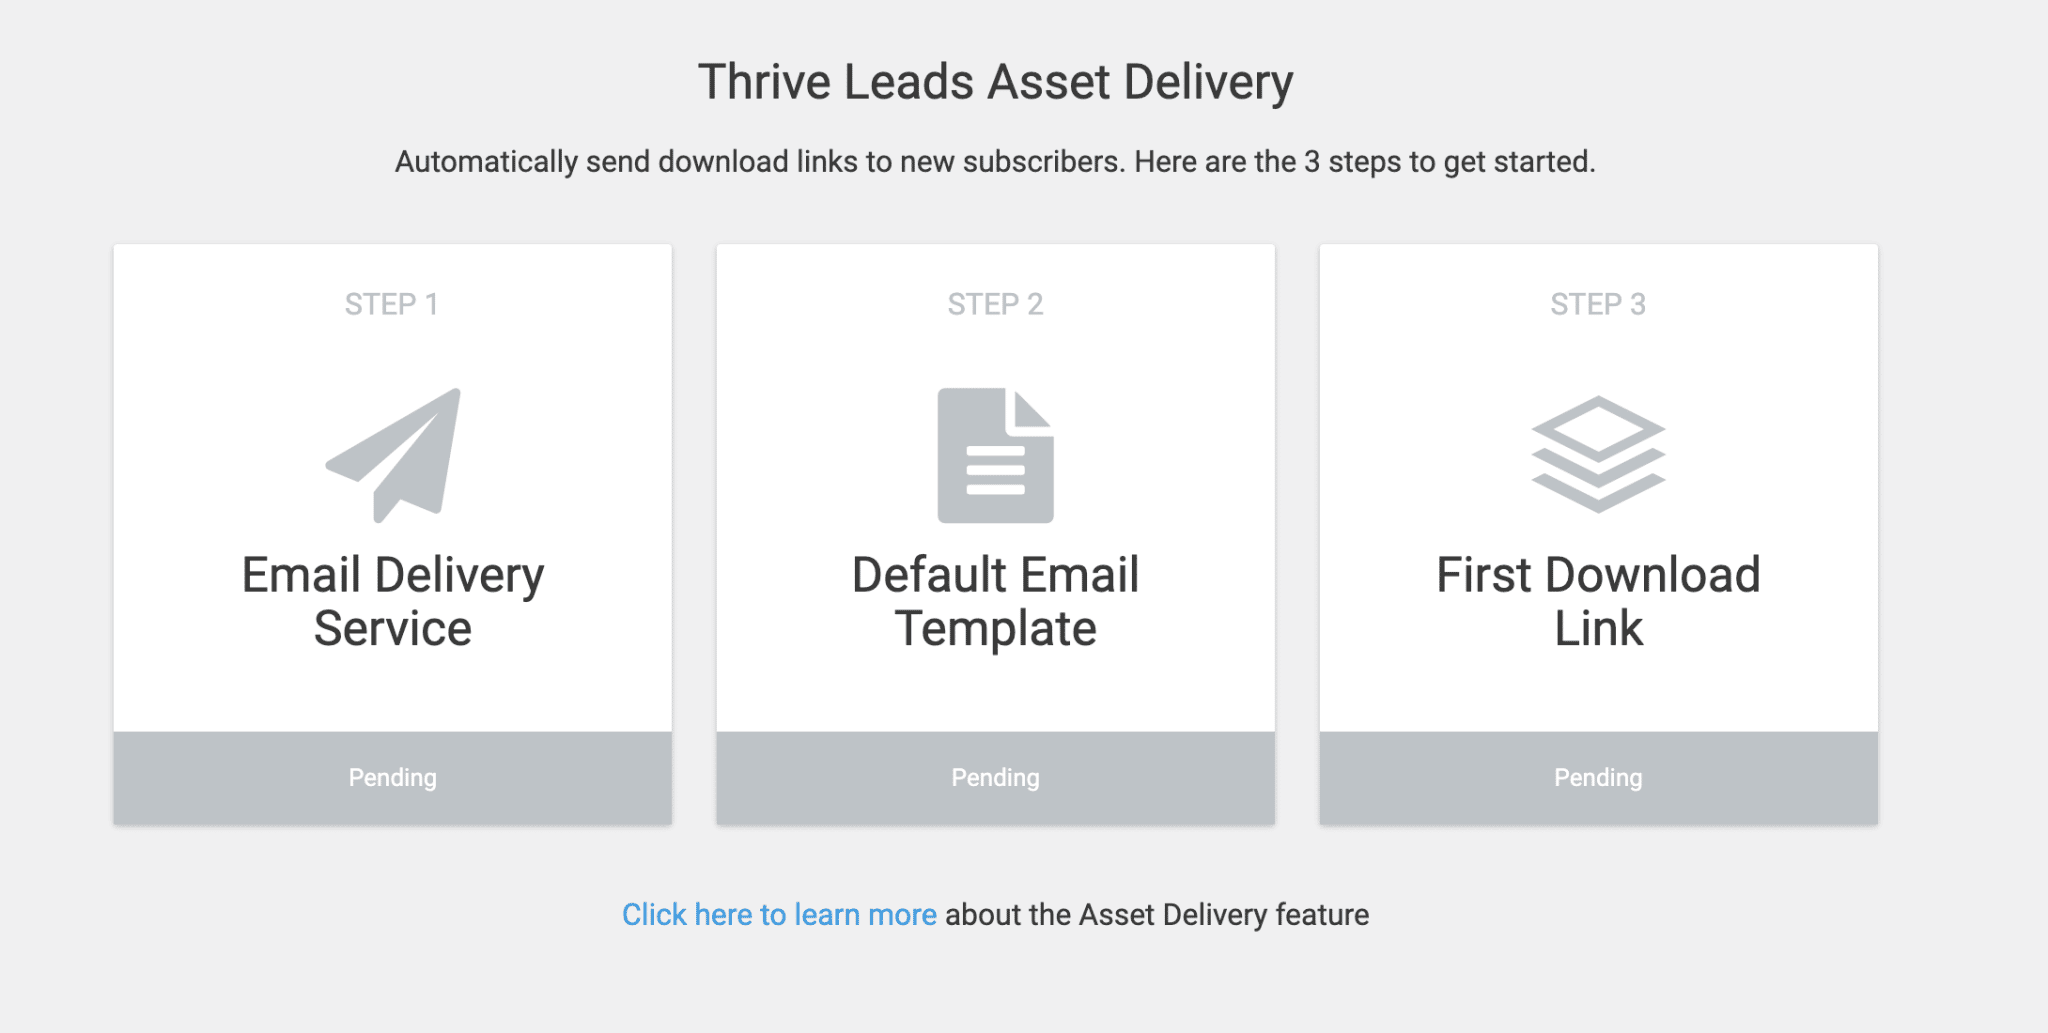 Thrive Leads Asset Delivery to send download links automatically to new subscribers.